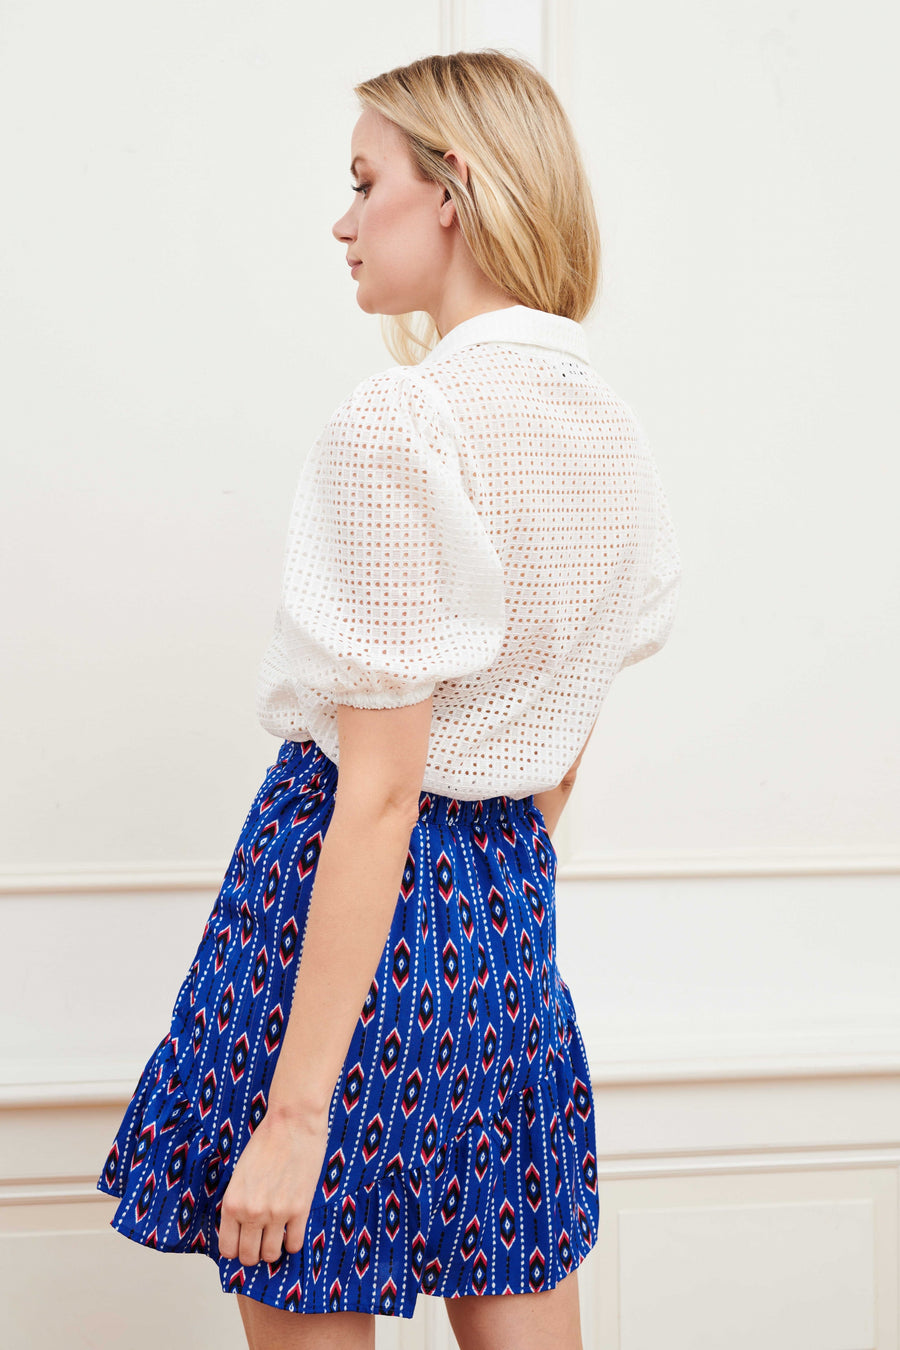 Skirt Molly | Crete Forms